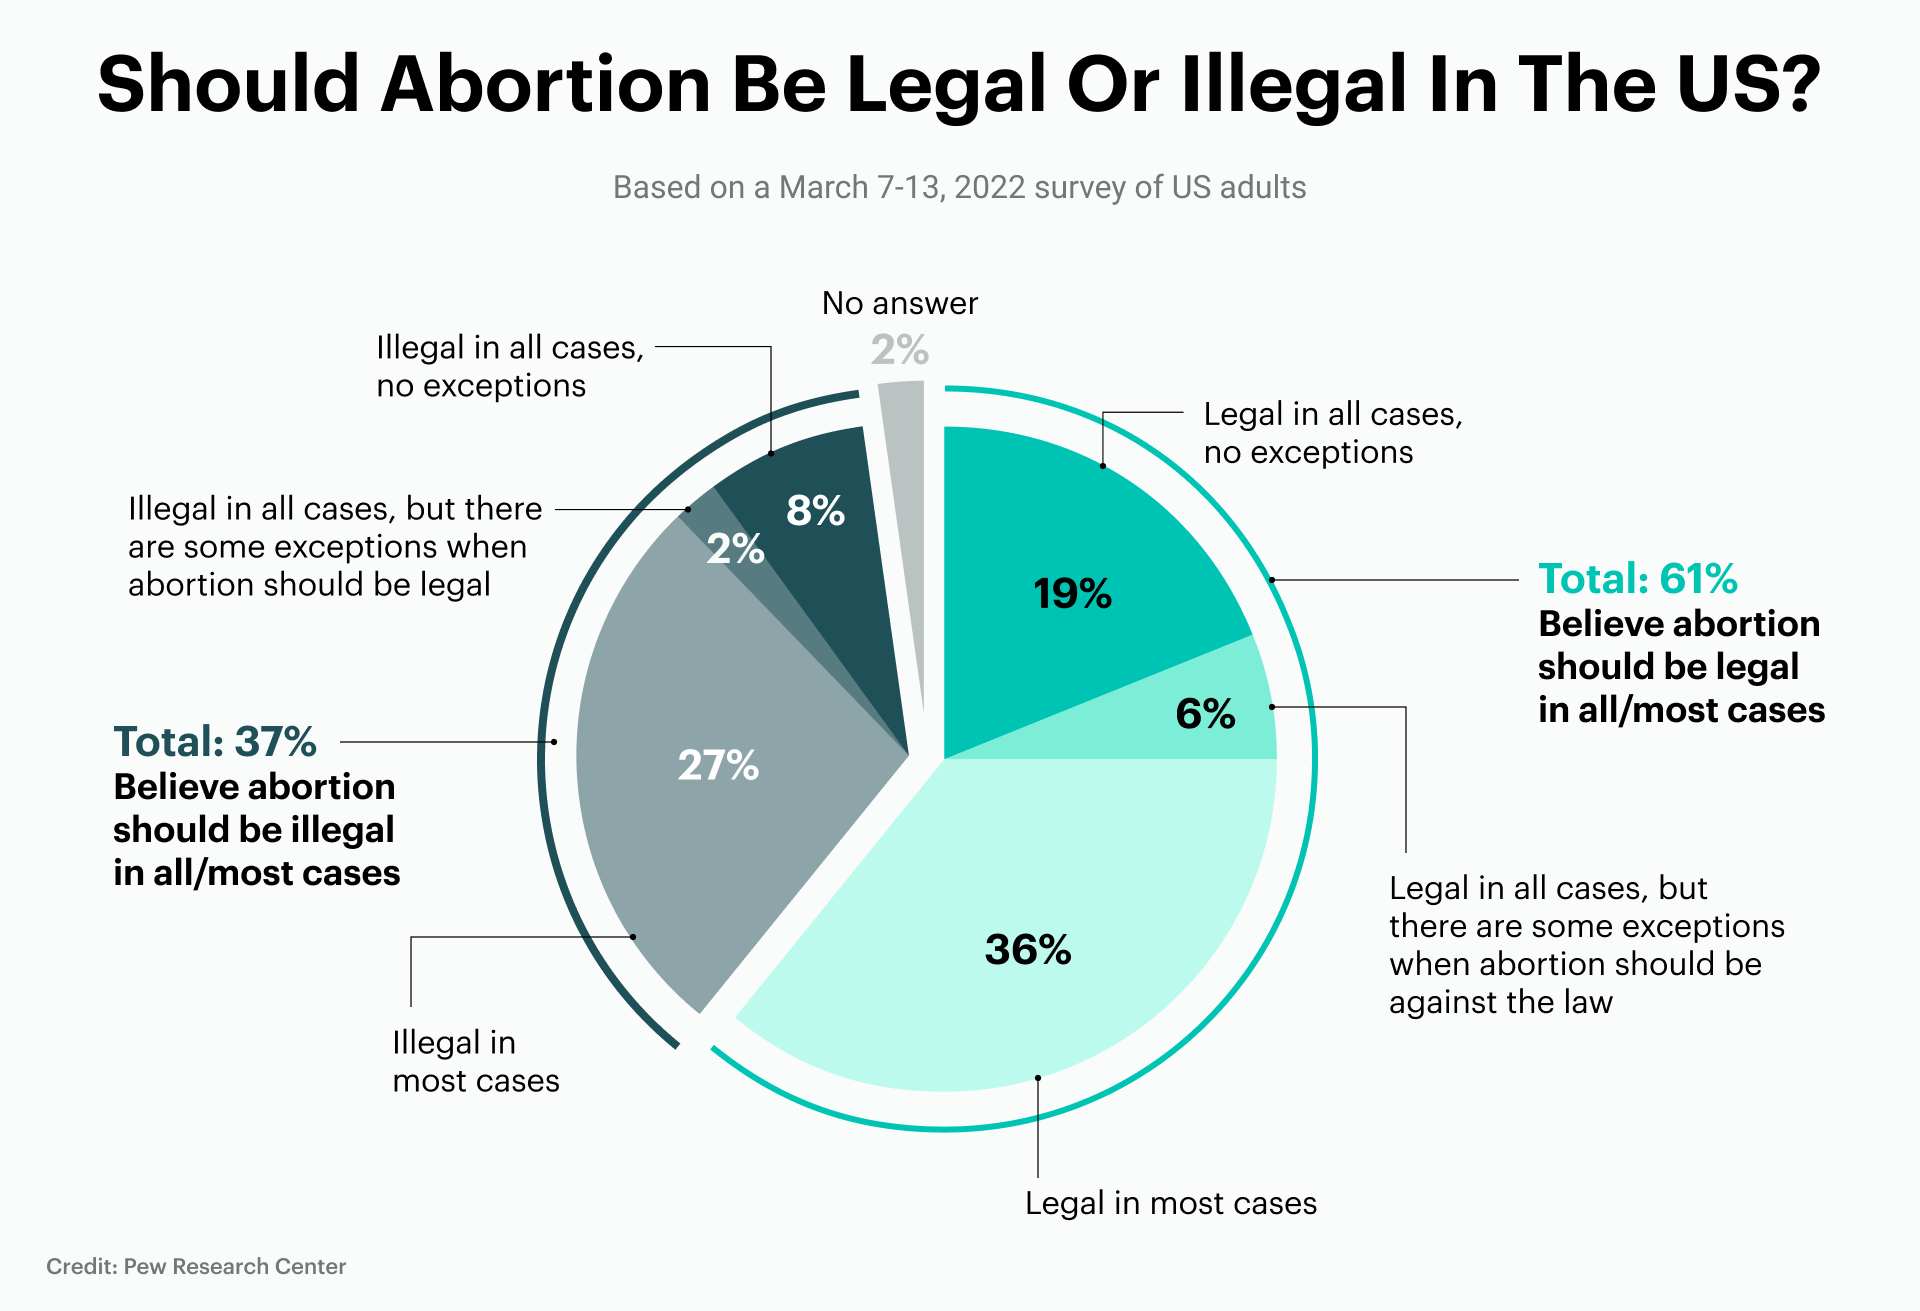 A pie chart showing abortion support in the US